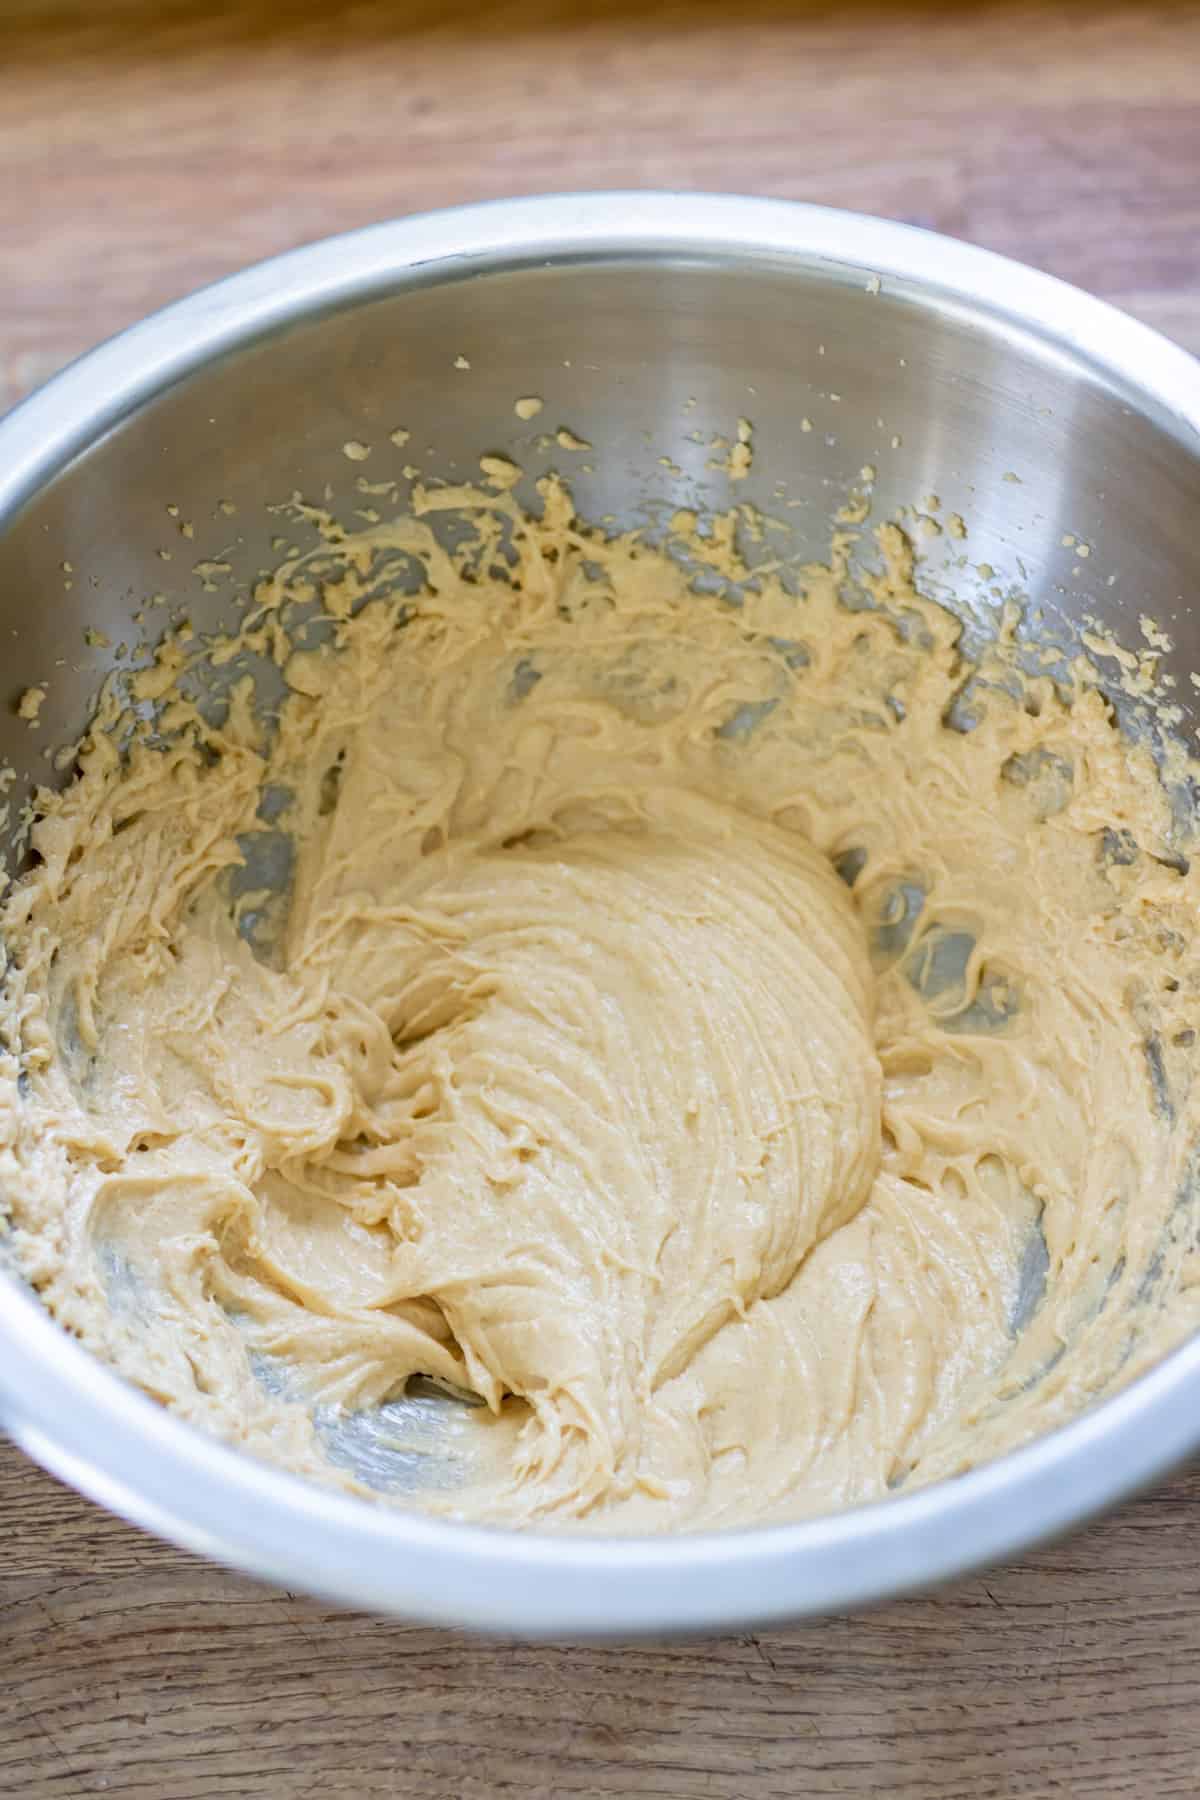 Mixing the egg and vanilla into the batter.